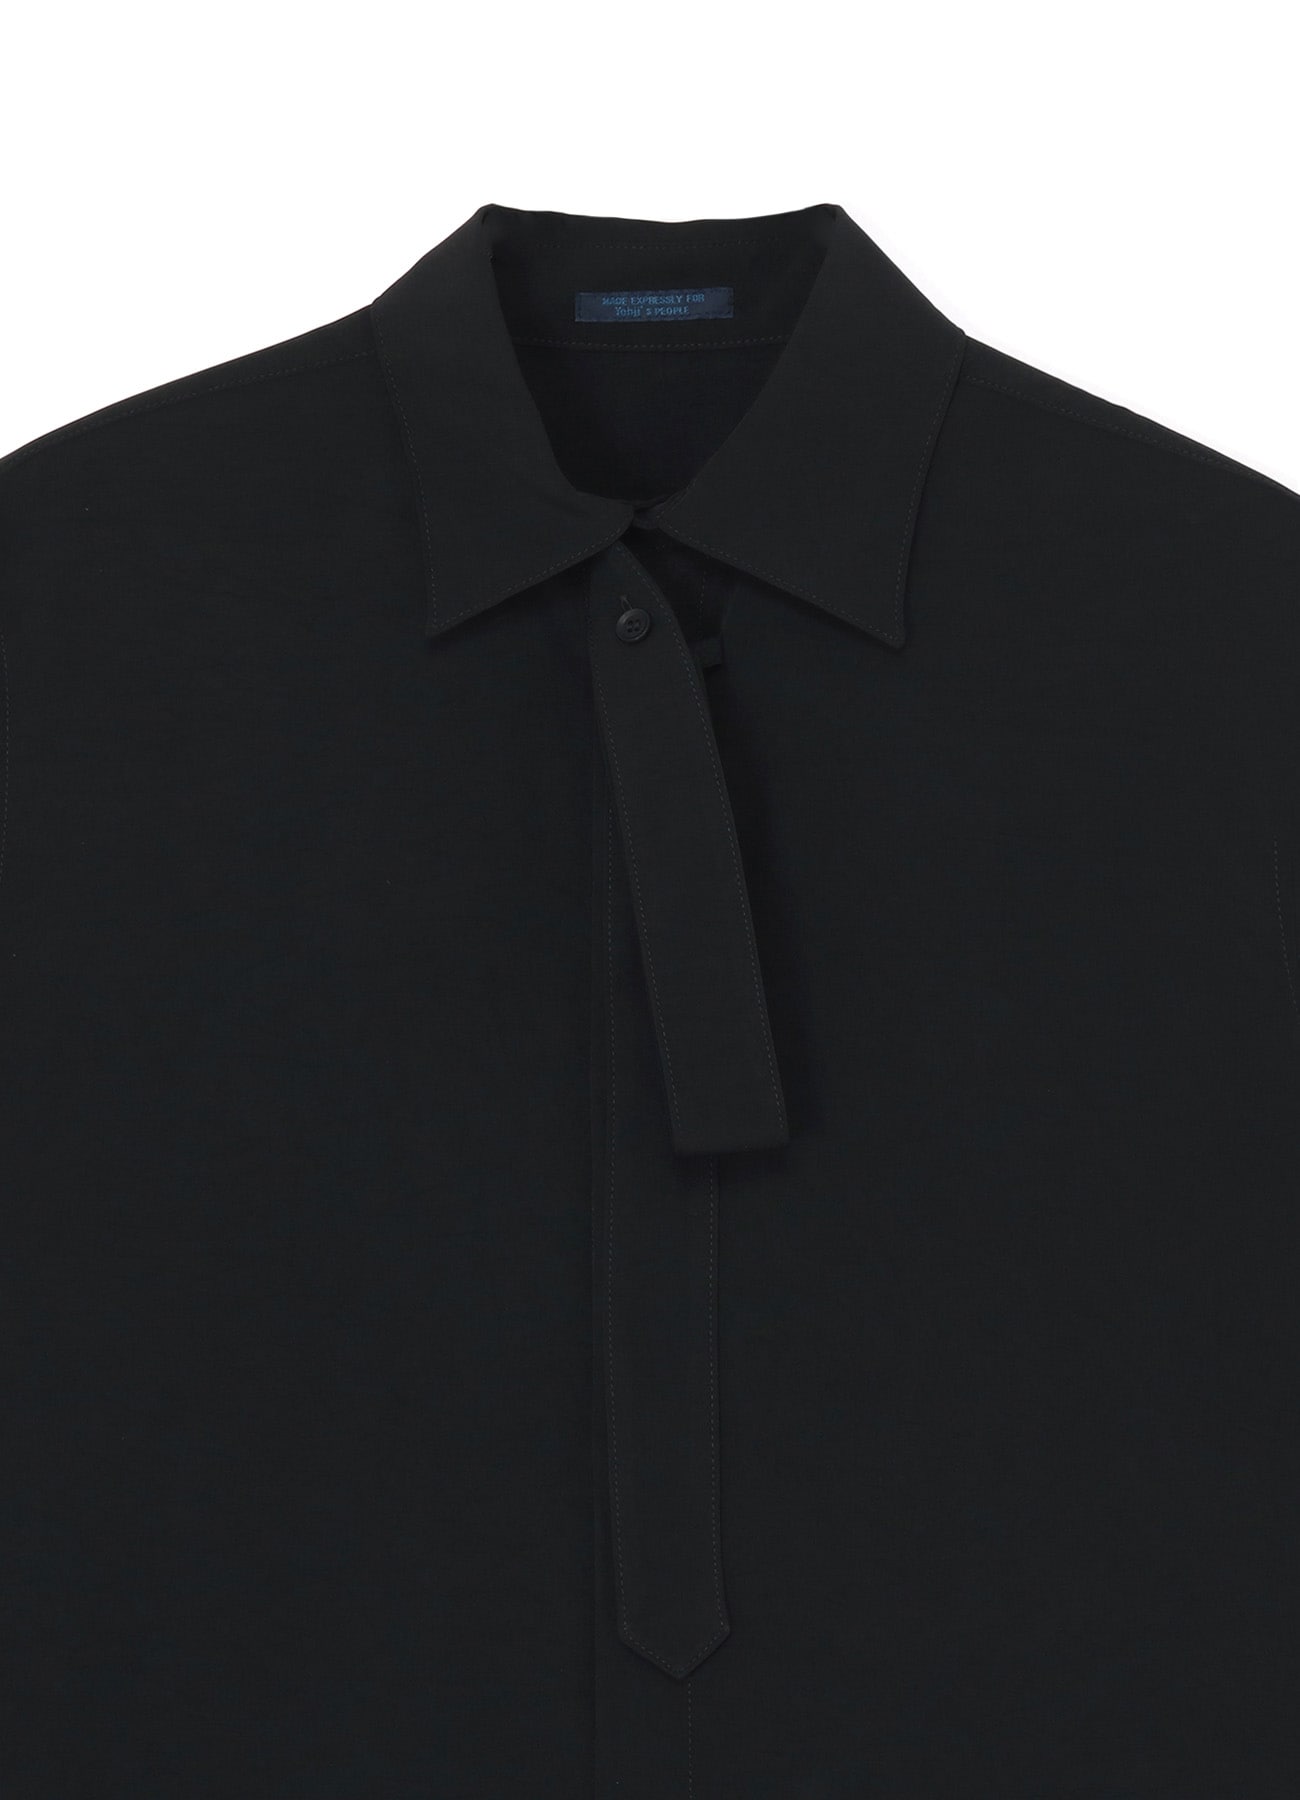 TRIACETATE/POLYESTER CREPE de CHINE SHIRT WITH DECONSTRUCTED PLACKET